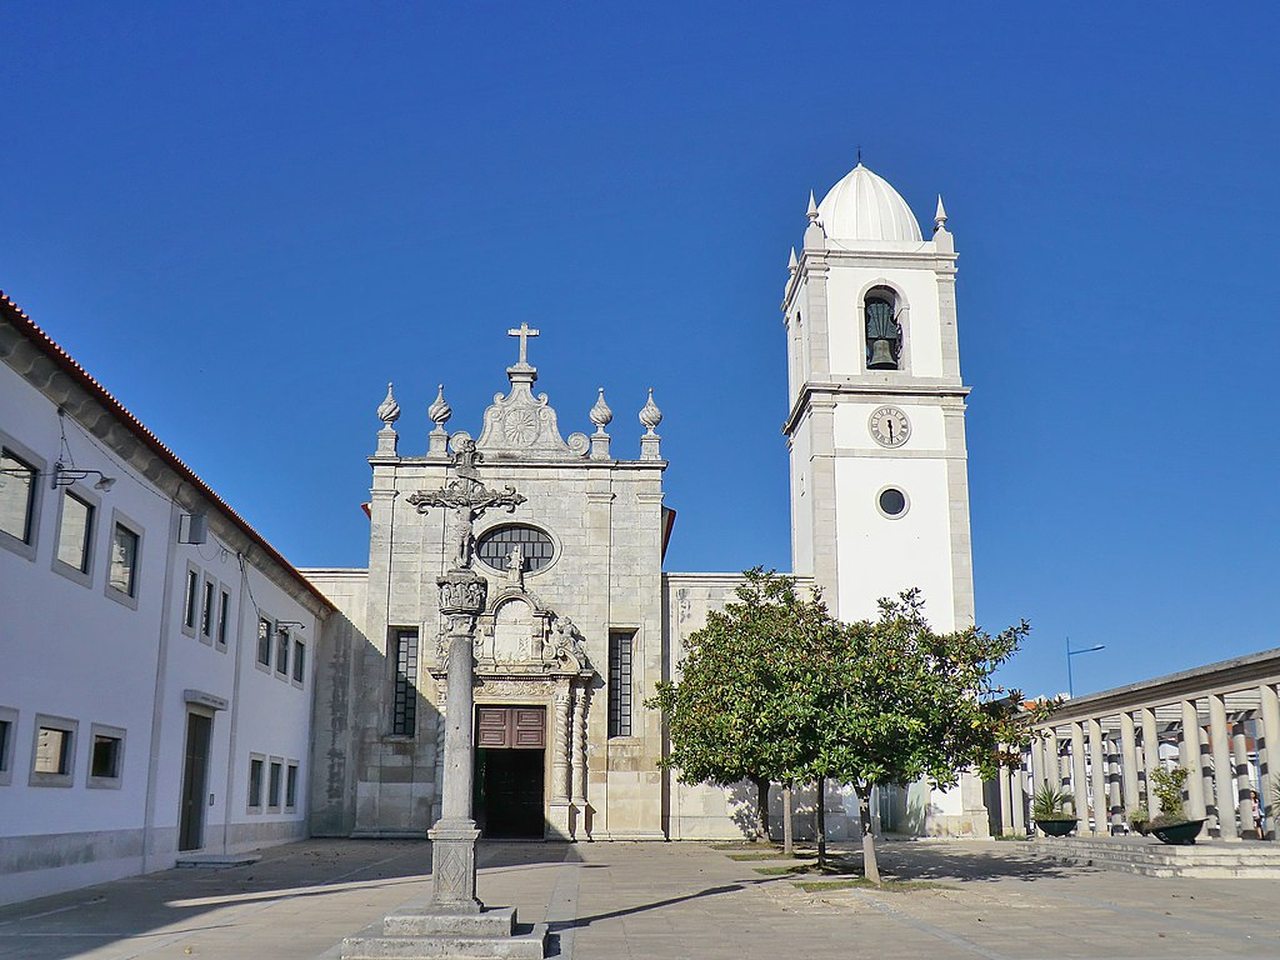 Courtyard view of the Aveiro Cathedral.